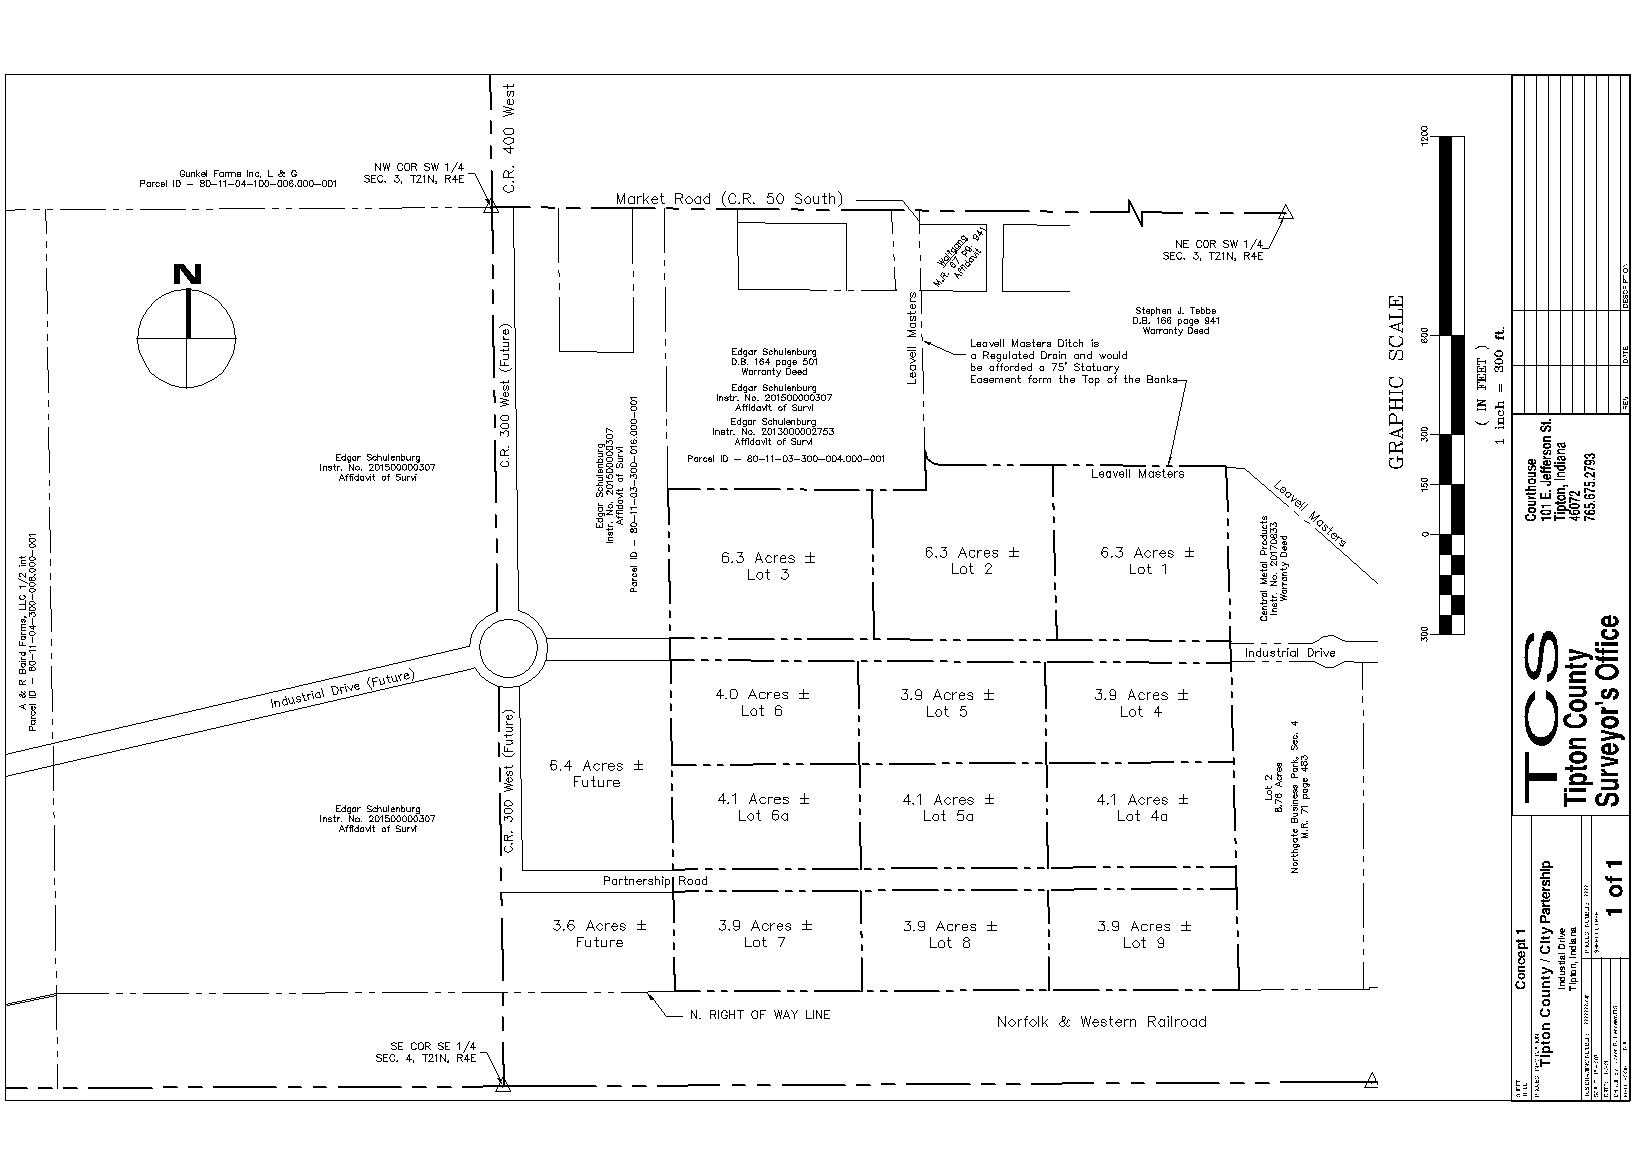 Northgate Industrial Park Available Commercial Sites